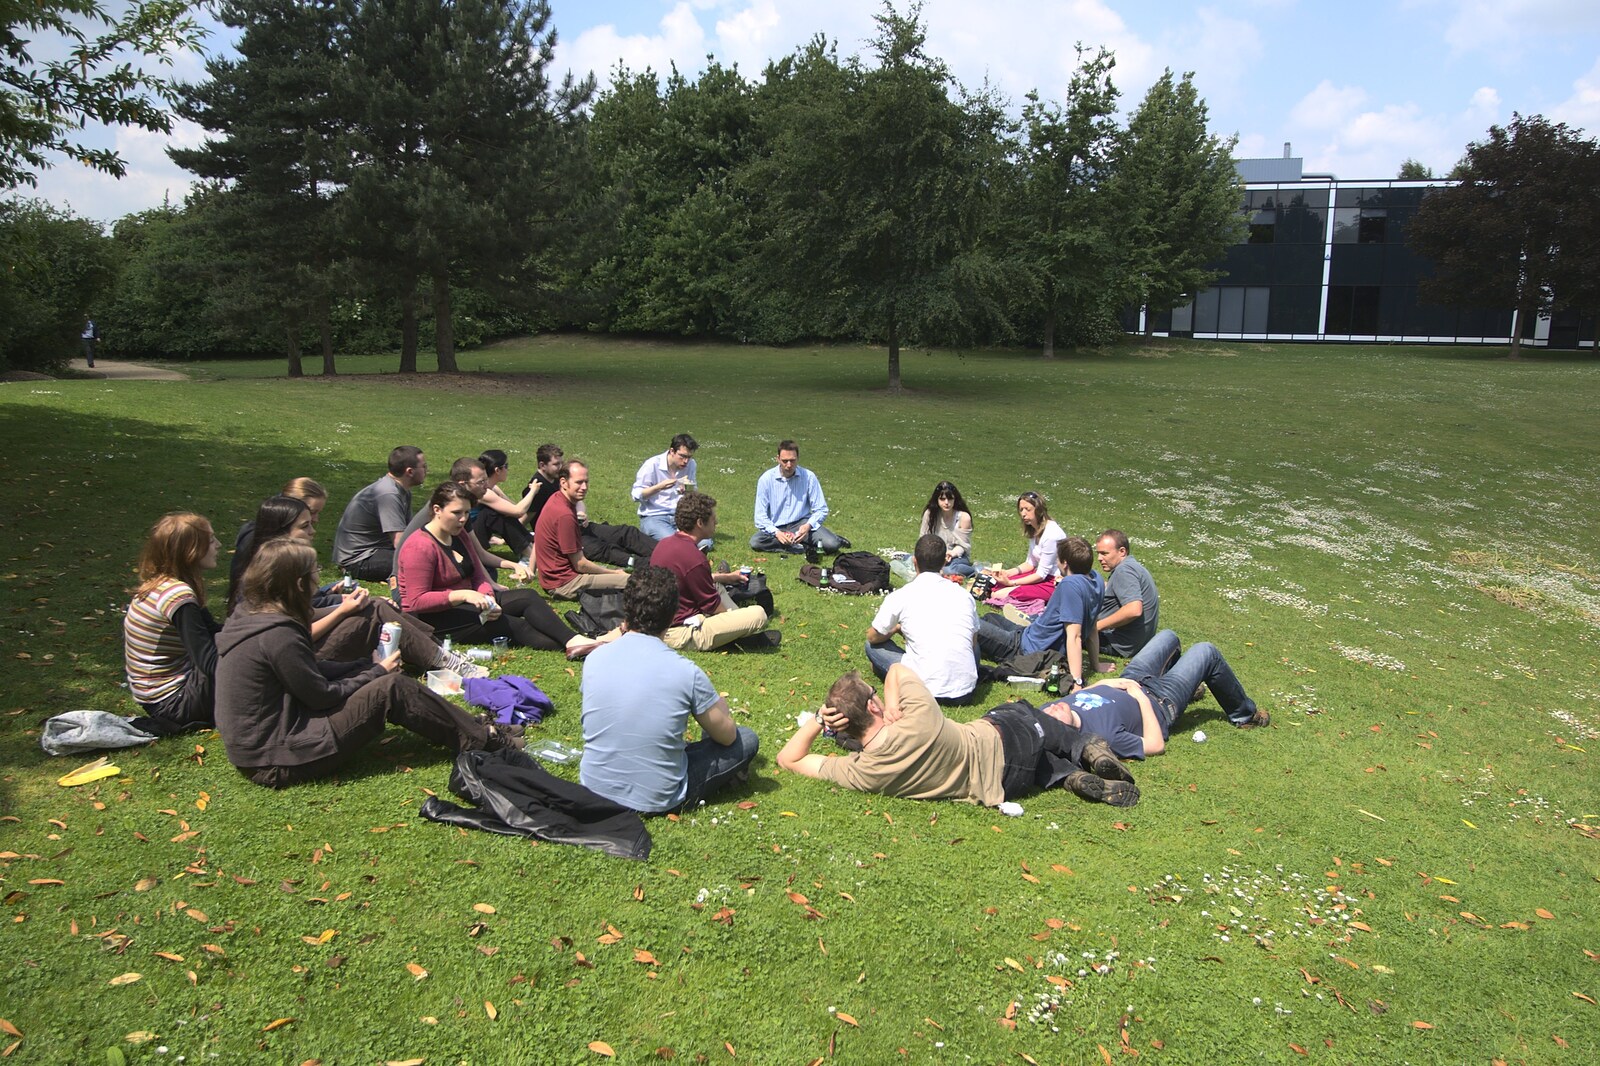 A picnic on the science park from Taptu's Million Searches, and a Picnic, Science Park, Cambridge - 29th May 2009